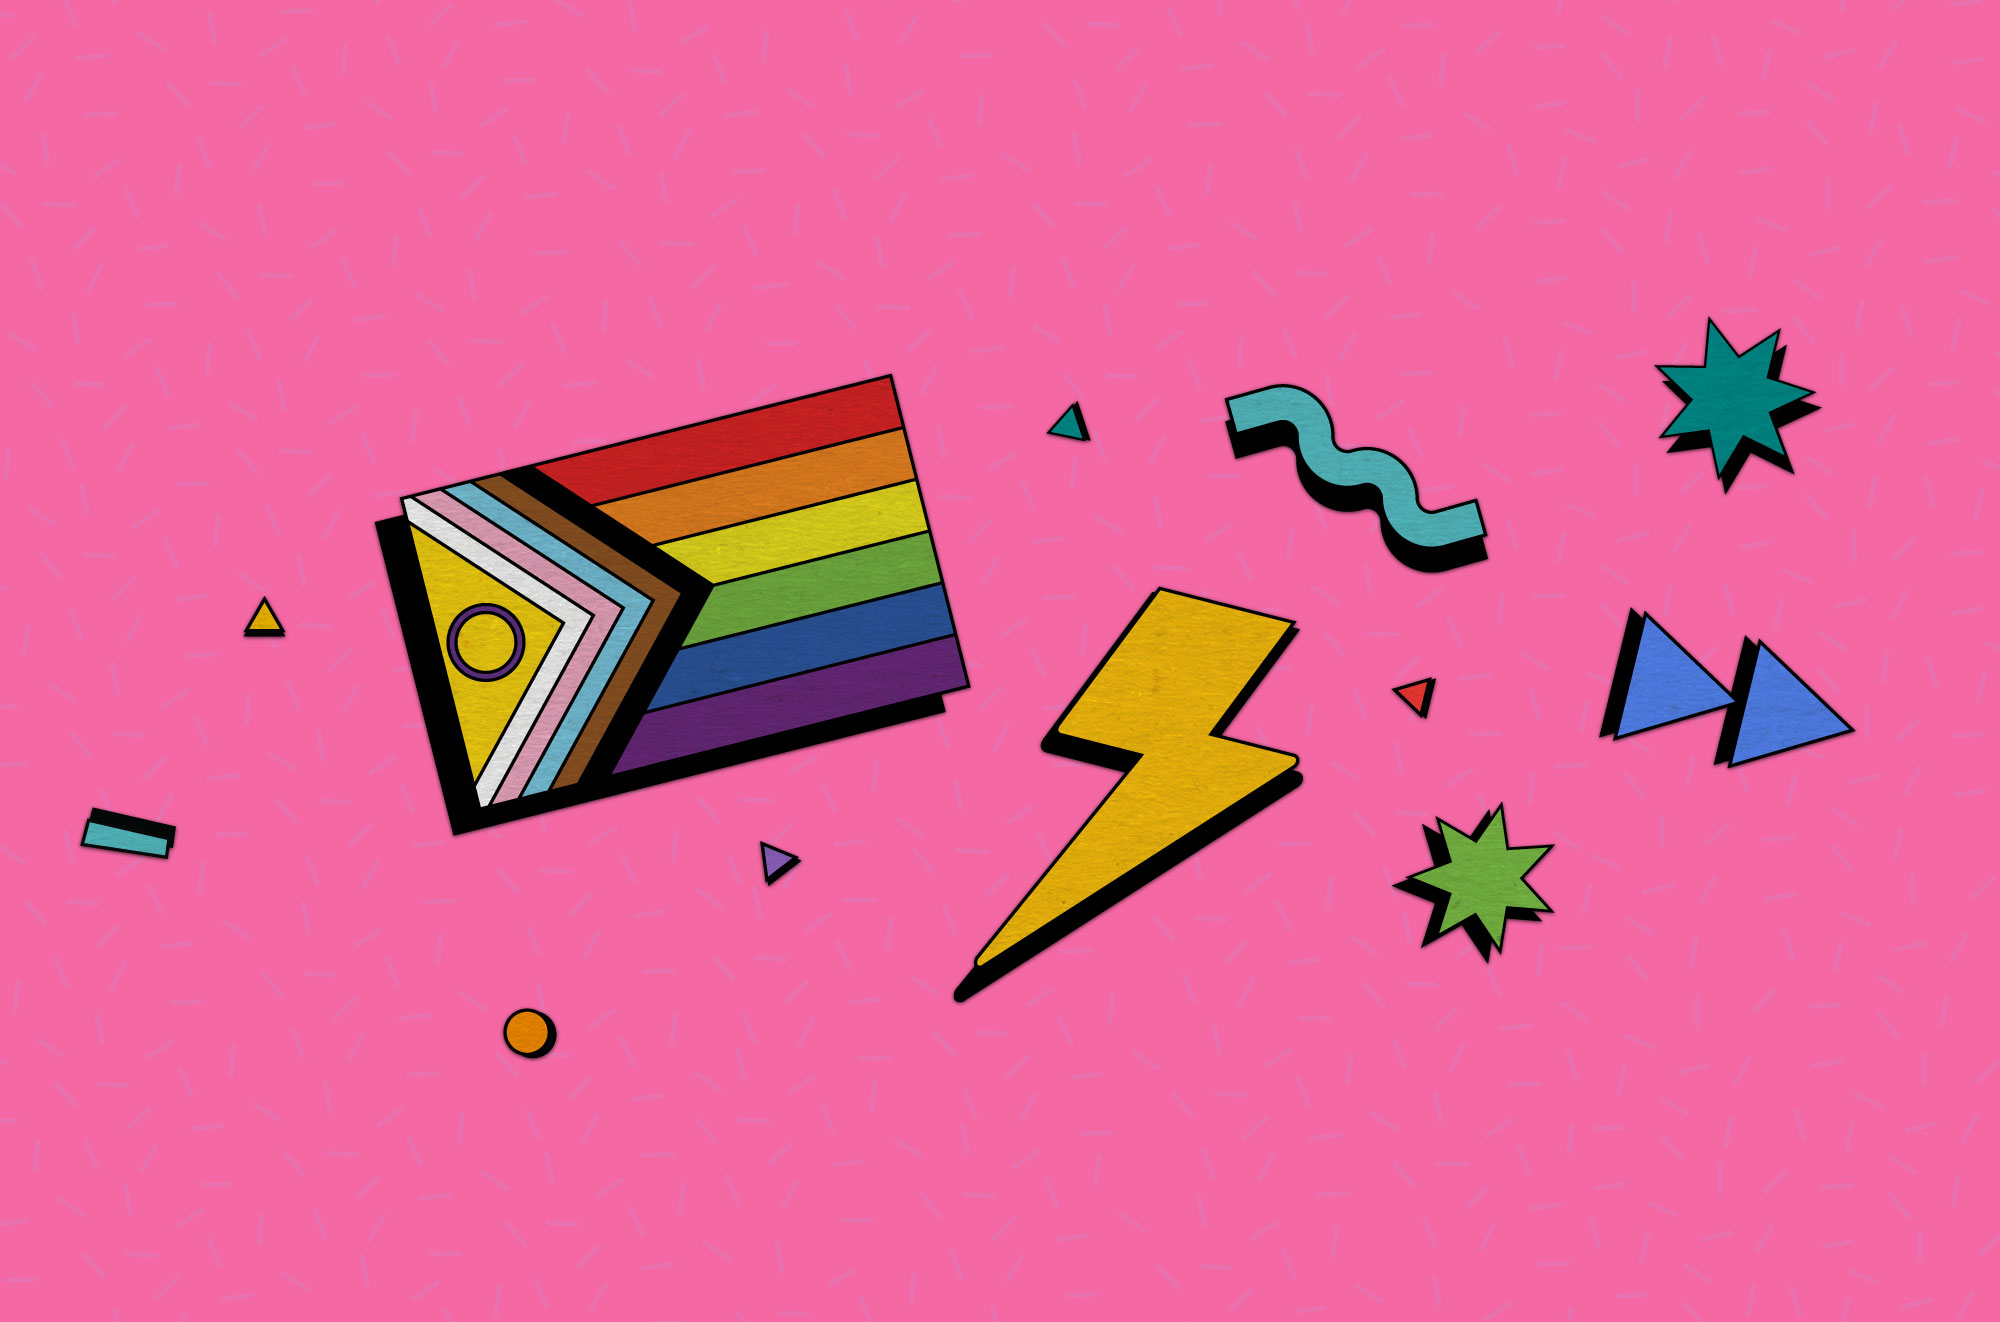 cut and arranged paper to resemble stickers of a lightning bolt, Pride flag, and other geometric shapes